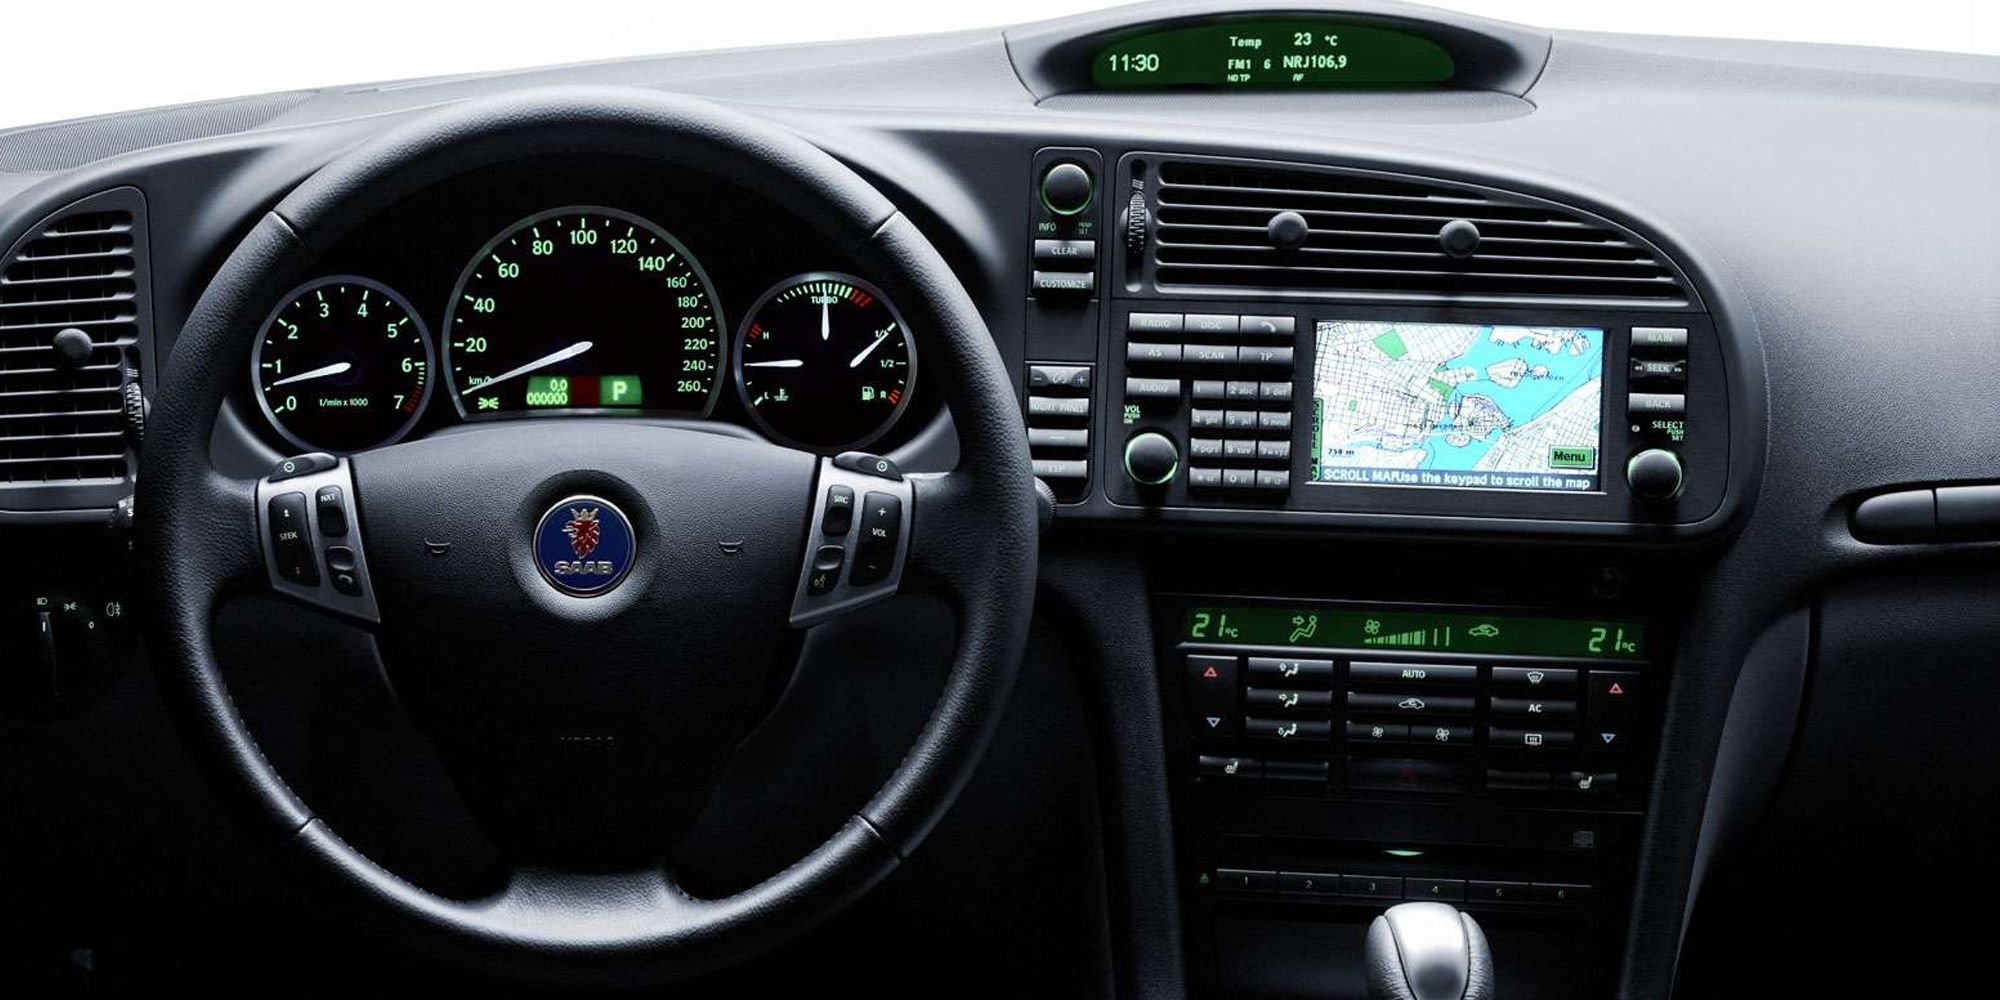 The interior of the Saab 9-3, from the driver's seat